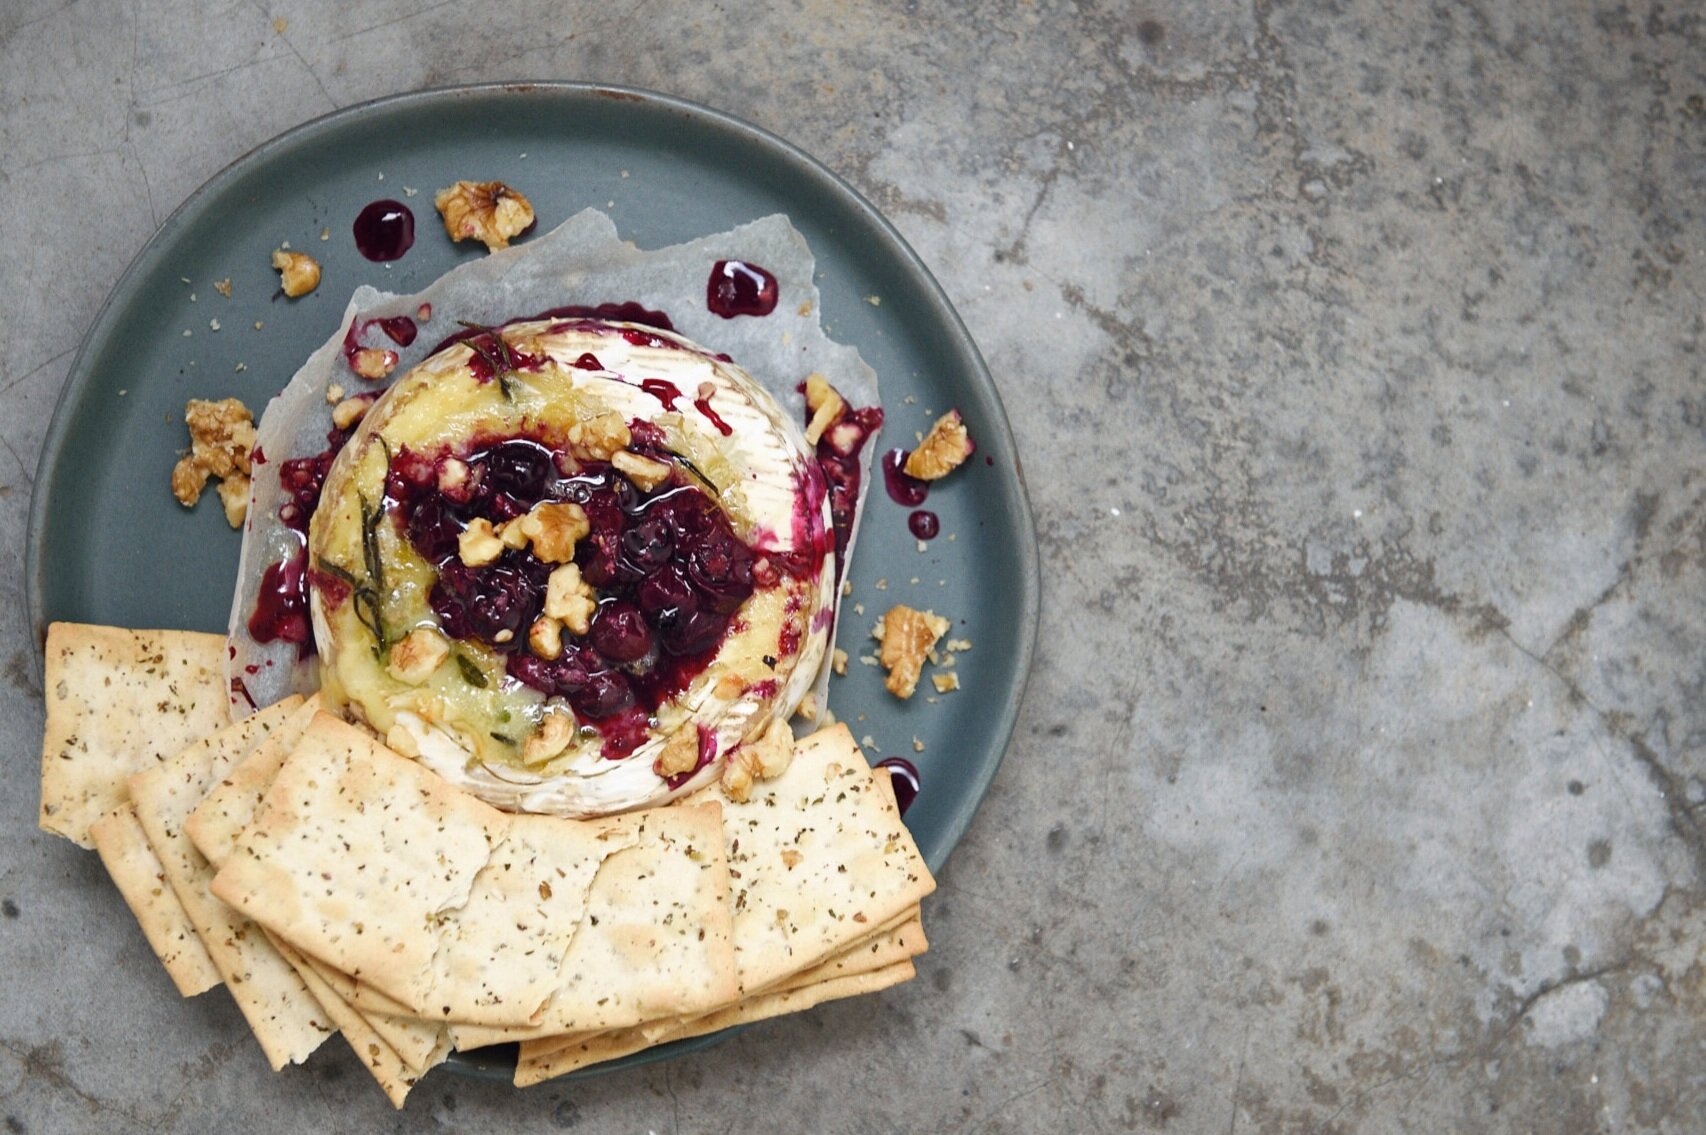 Baked Brie with Blueberry Coulis